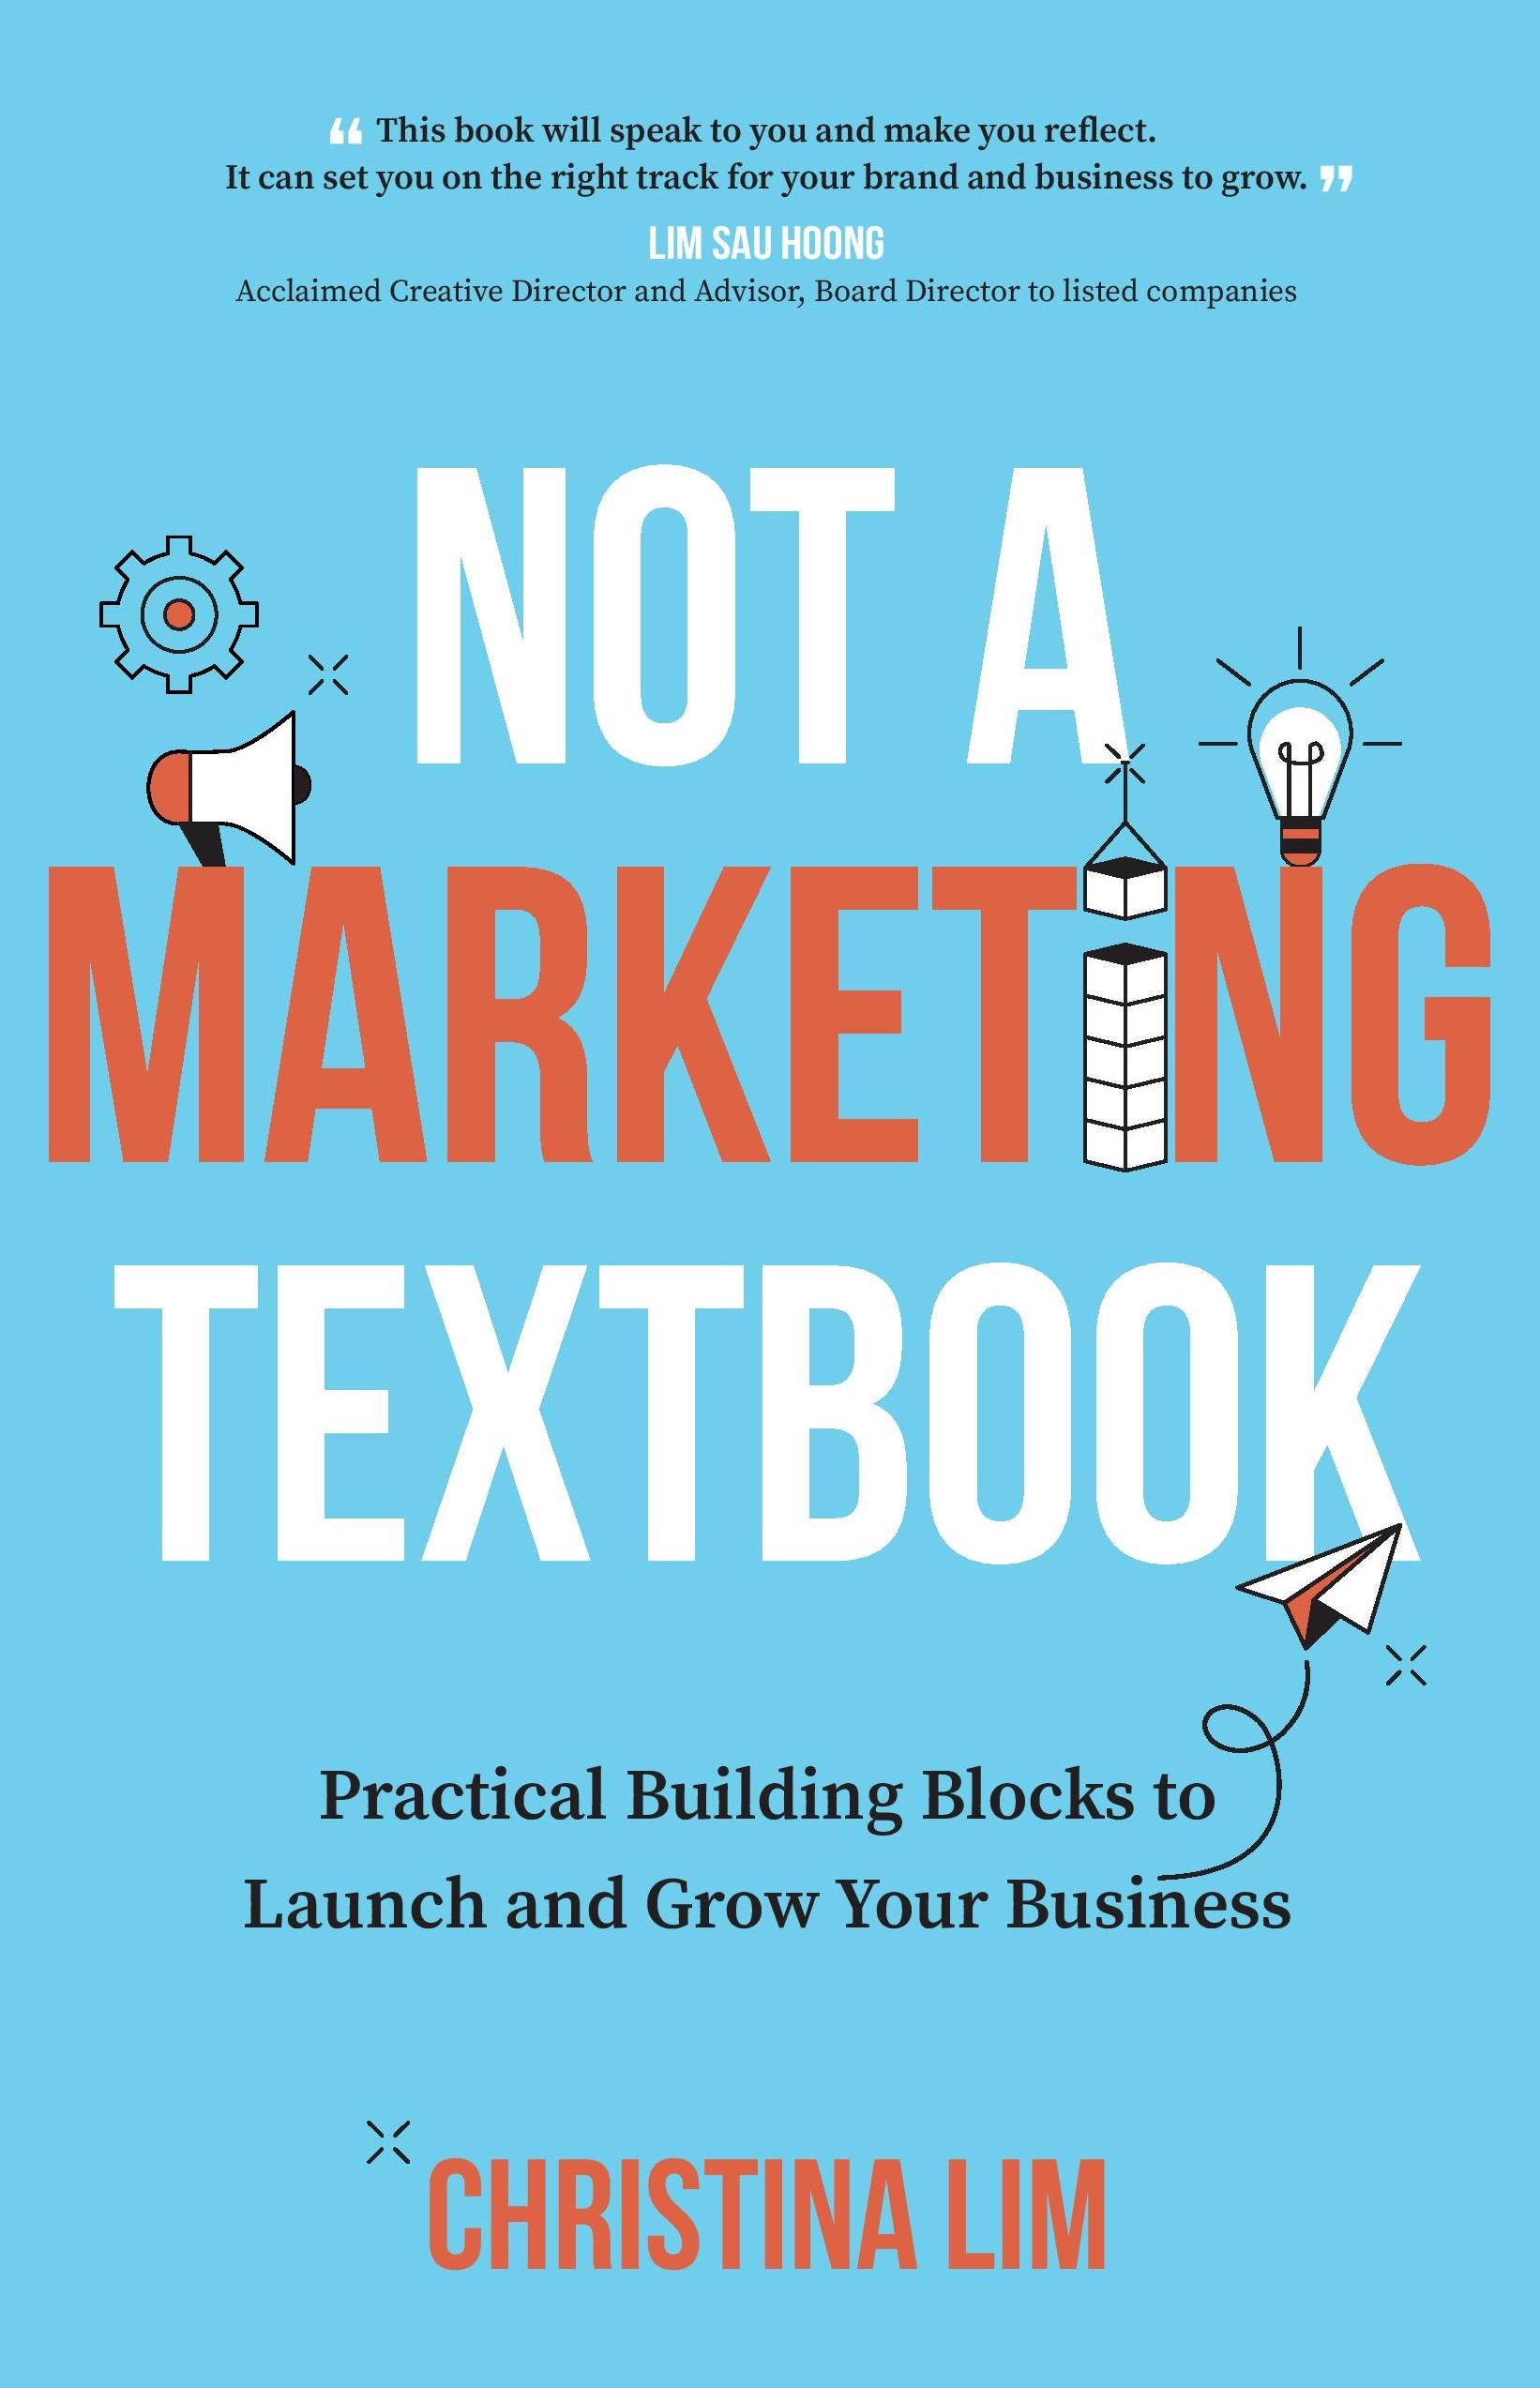 Not a Marketing Textbook: Practical Building Blocks to Launch and Grow Your Business